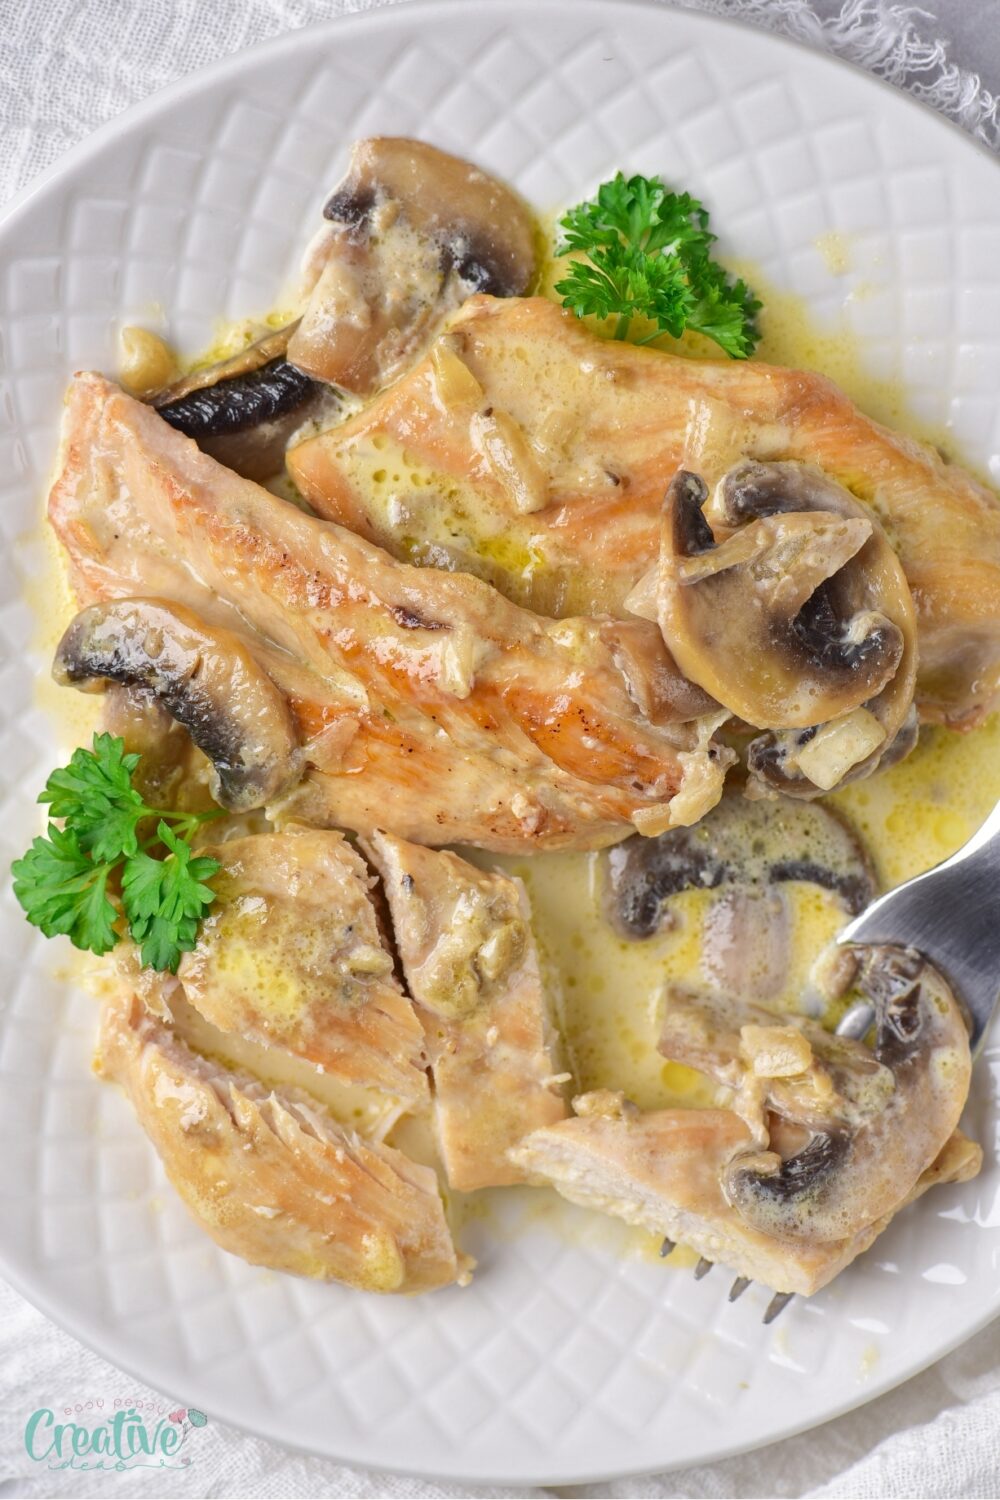 What makes this creamy chicken and mushroom dish even more versatile is the fact that you can customize it to your liking with different herbs, spices, and even vegetables.